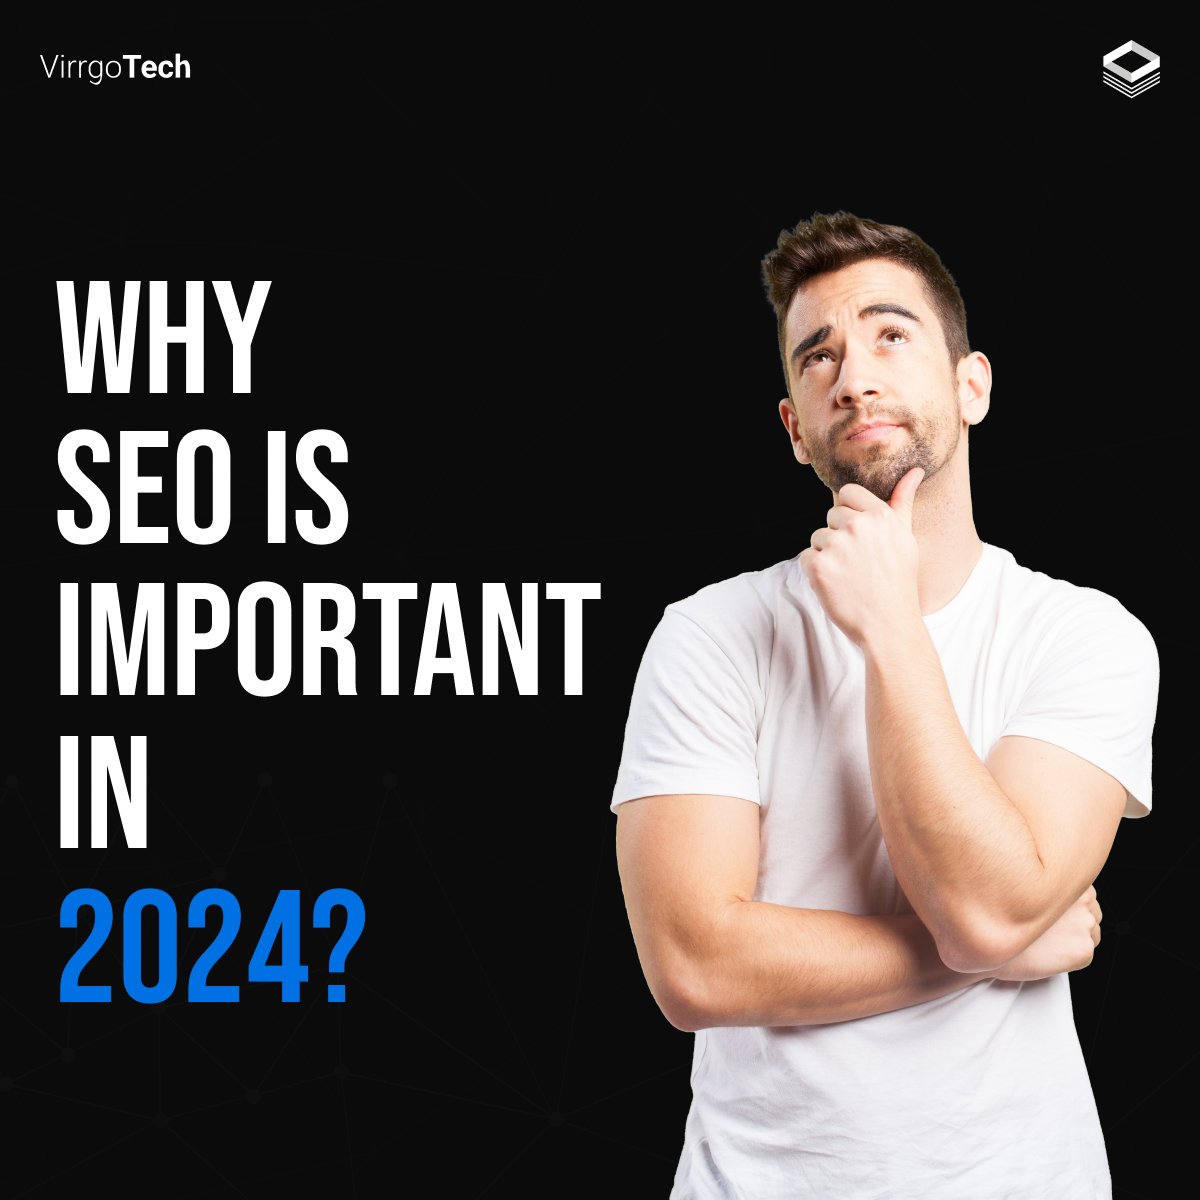 SEO (Search Engine Optimization) is the key to online success. Here's why it's more crucial than ever:

(Con't in comment)

#seo #seotips #seotipps #seogoals #seotipsandtricks #seostrategy #onlinesucces